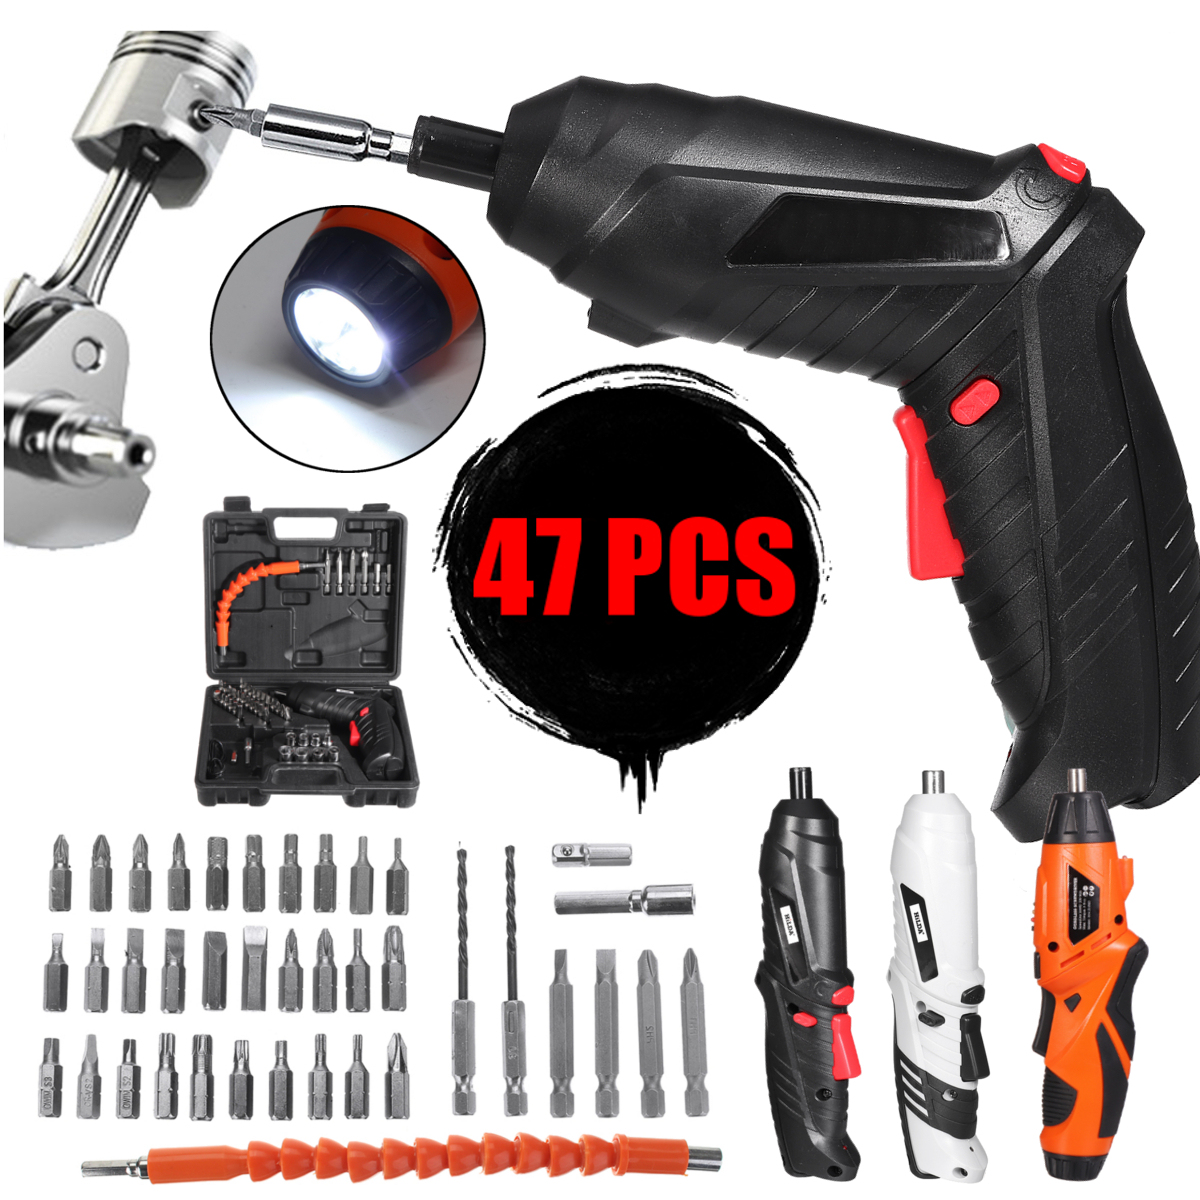 47-in-1-Rechargeable-Wireless-Cordless-Electric-Screwdriver-Drill-Kit-Power-Tool-Home-Improvement-DI-1780811-2